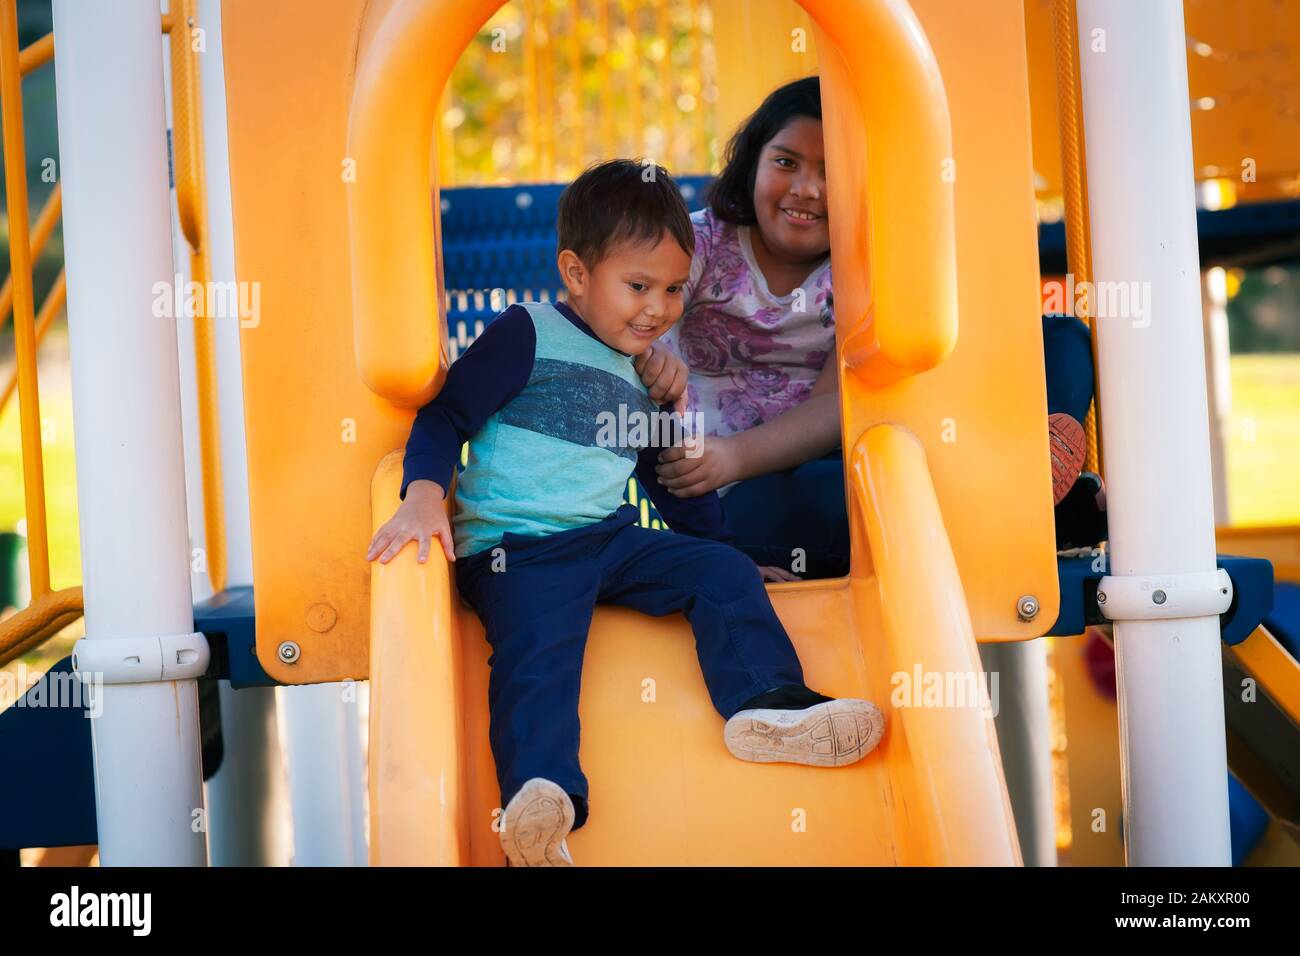 A little brother being helped by his older sister, who is about to go down a kids playground slide. Stock Photo